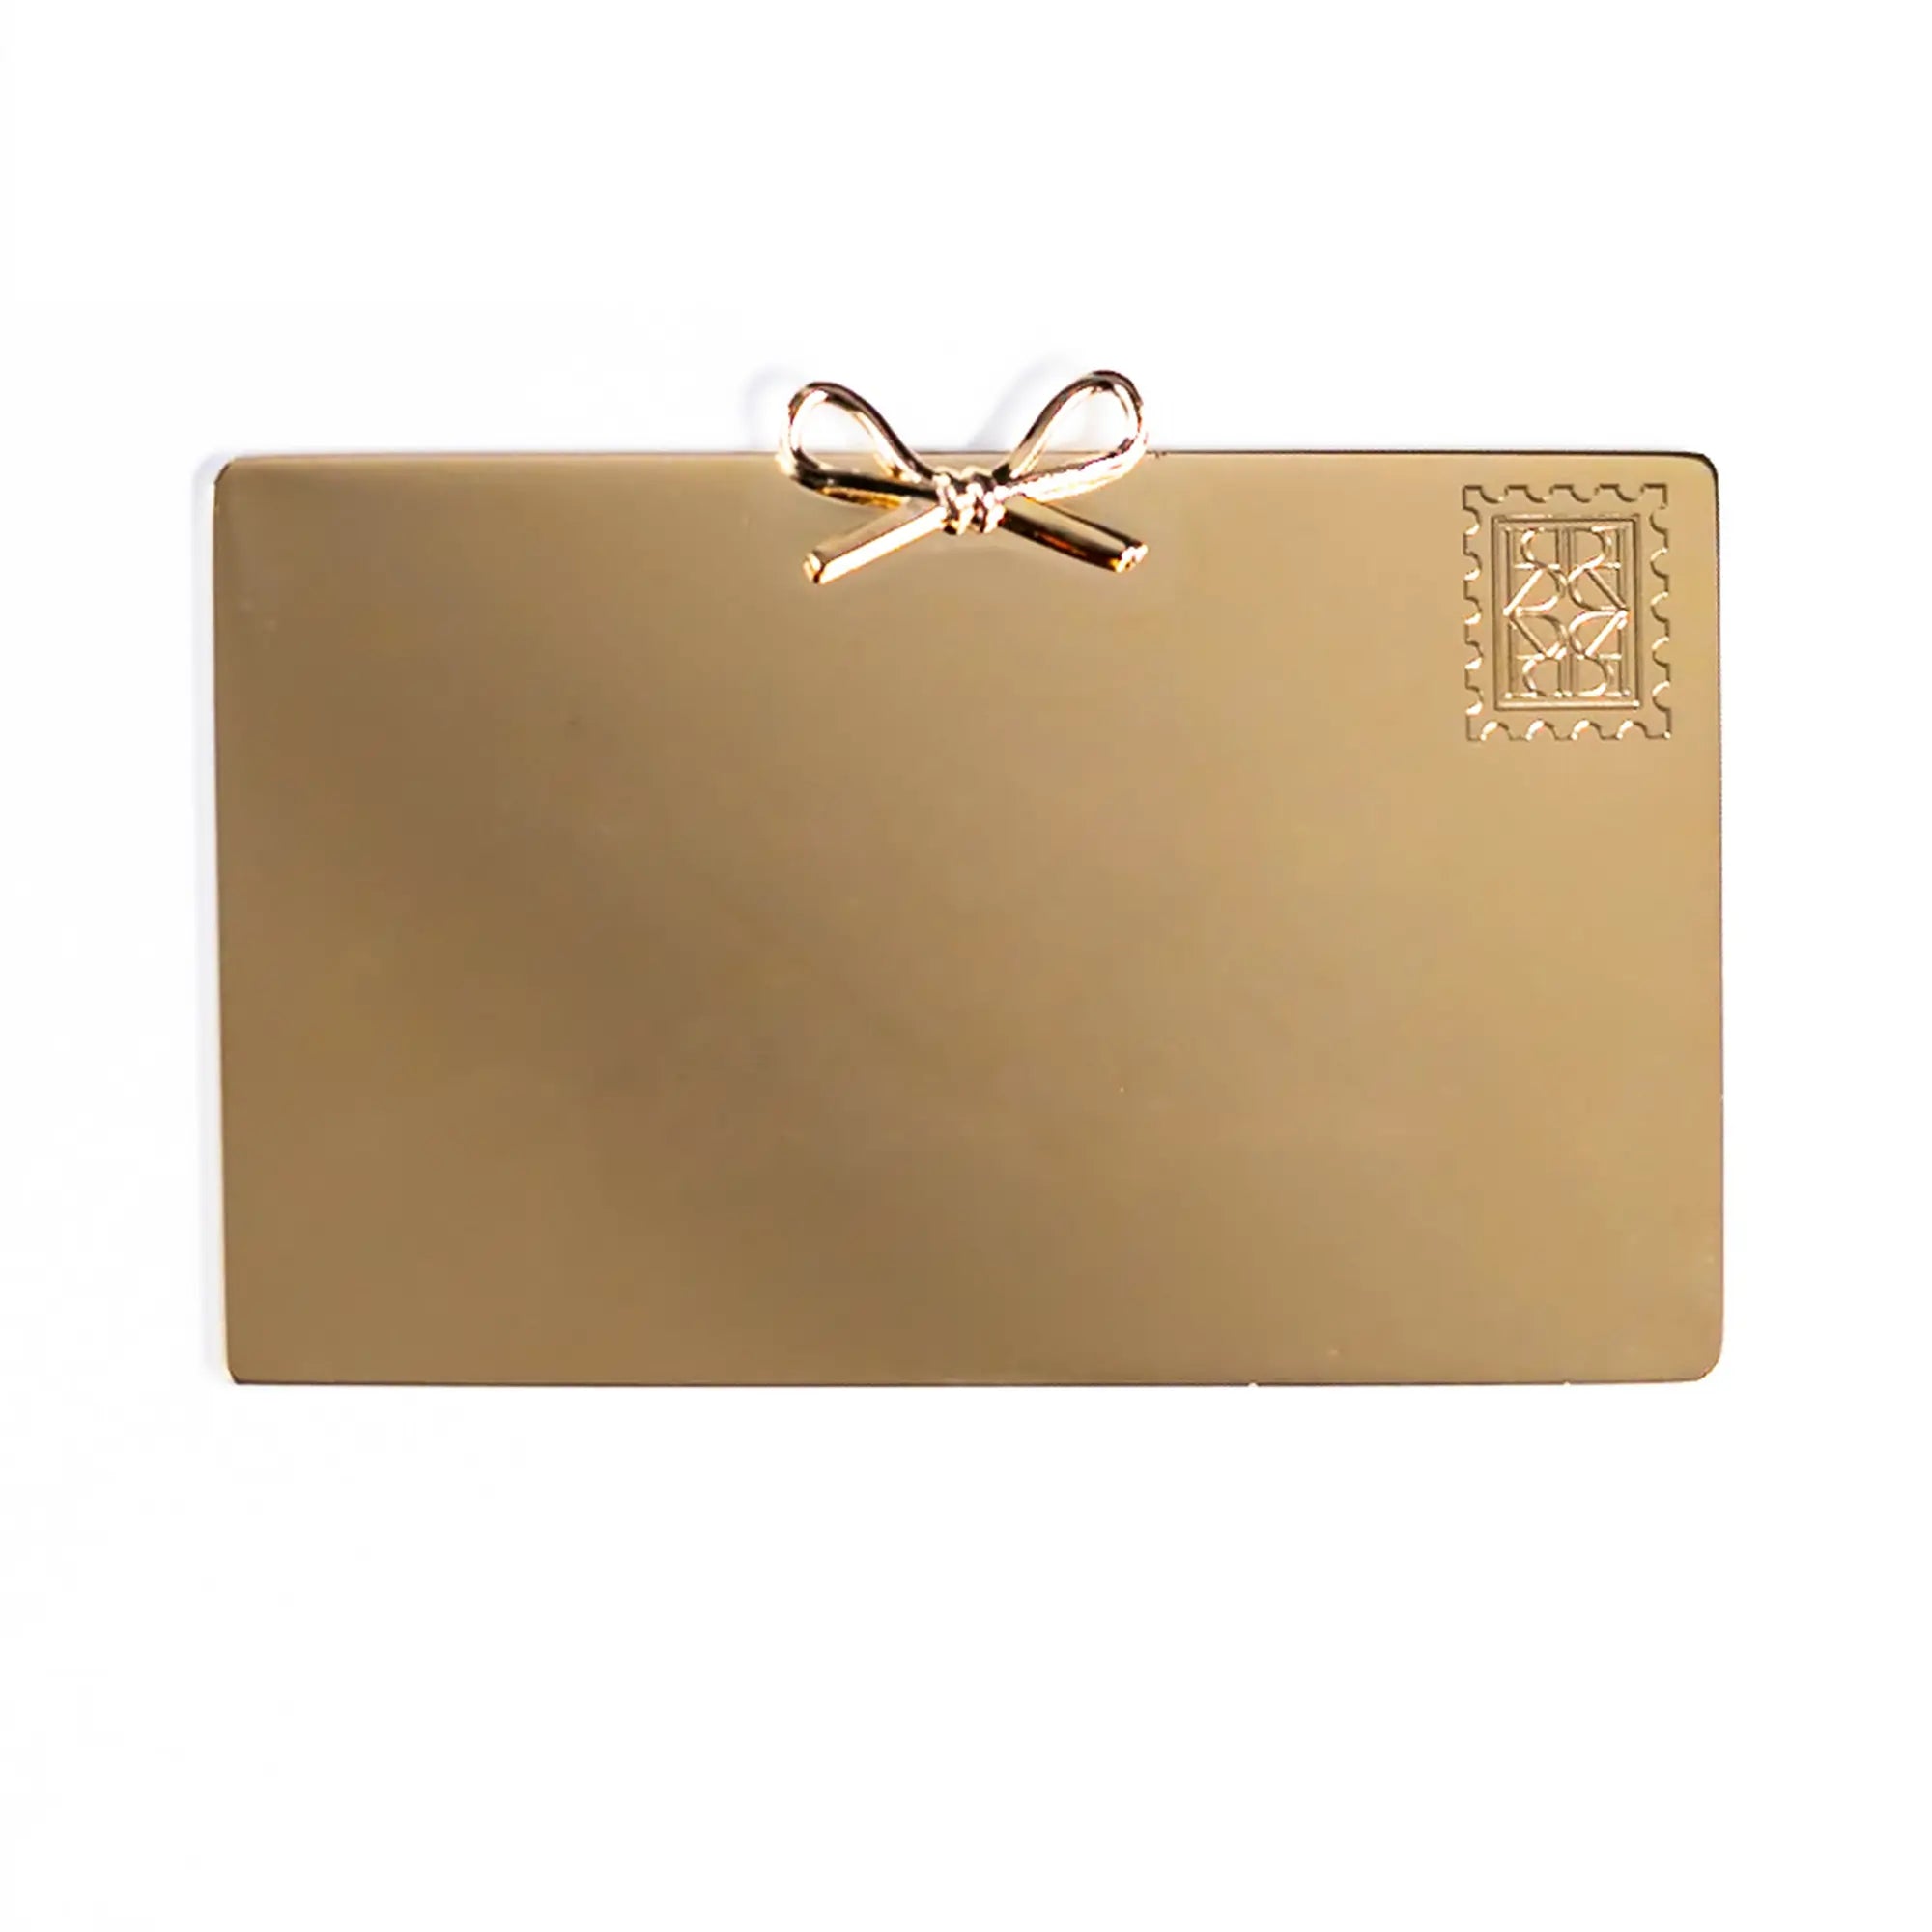 Gold-colored gift card with bow design and Personalized Plaque Sentiment Engraving on a white background by The Bella Rosa Collection.